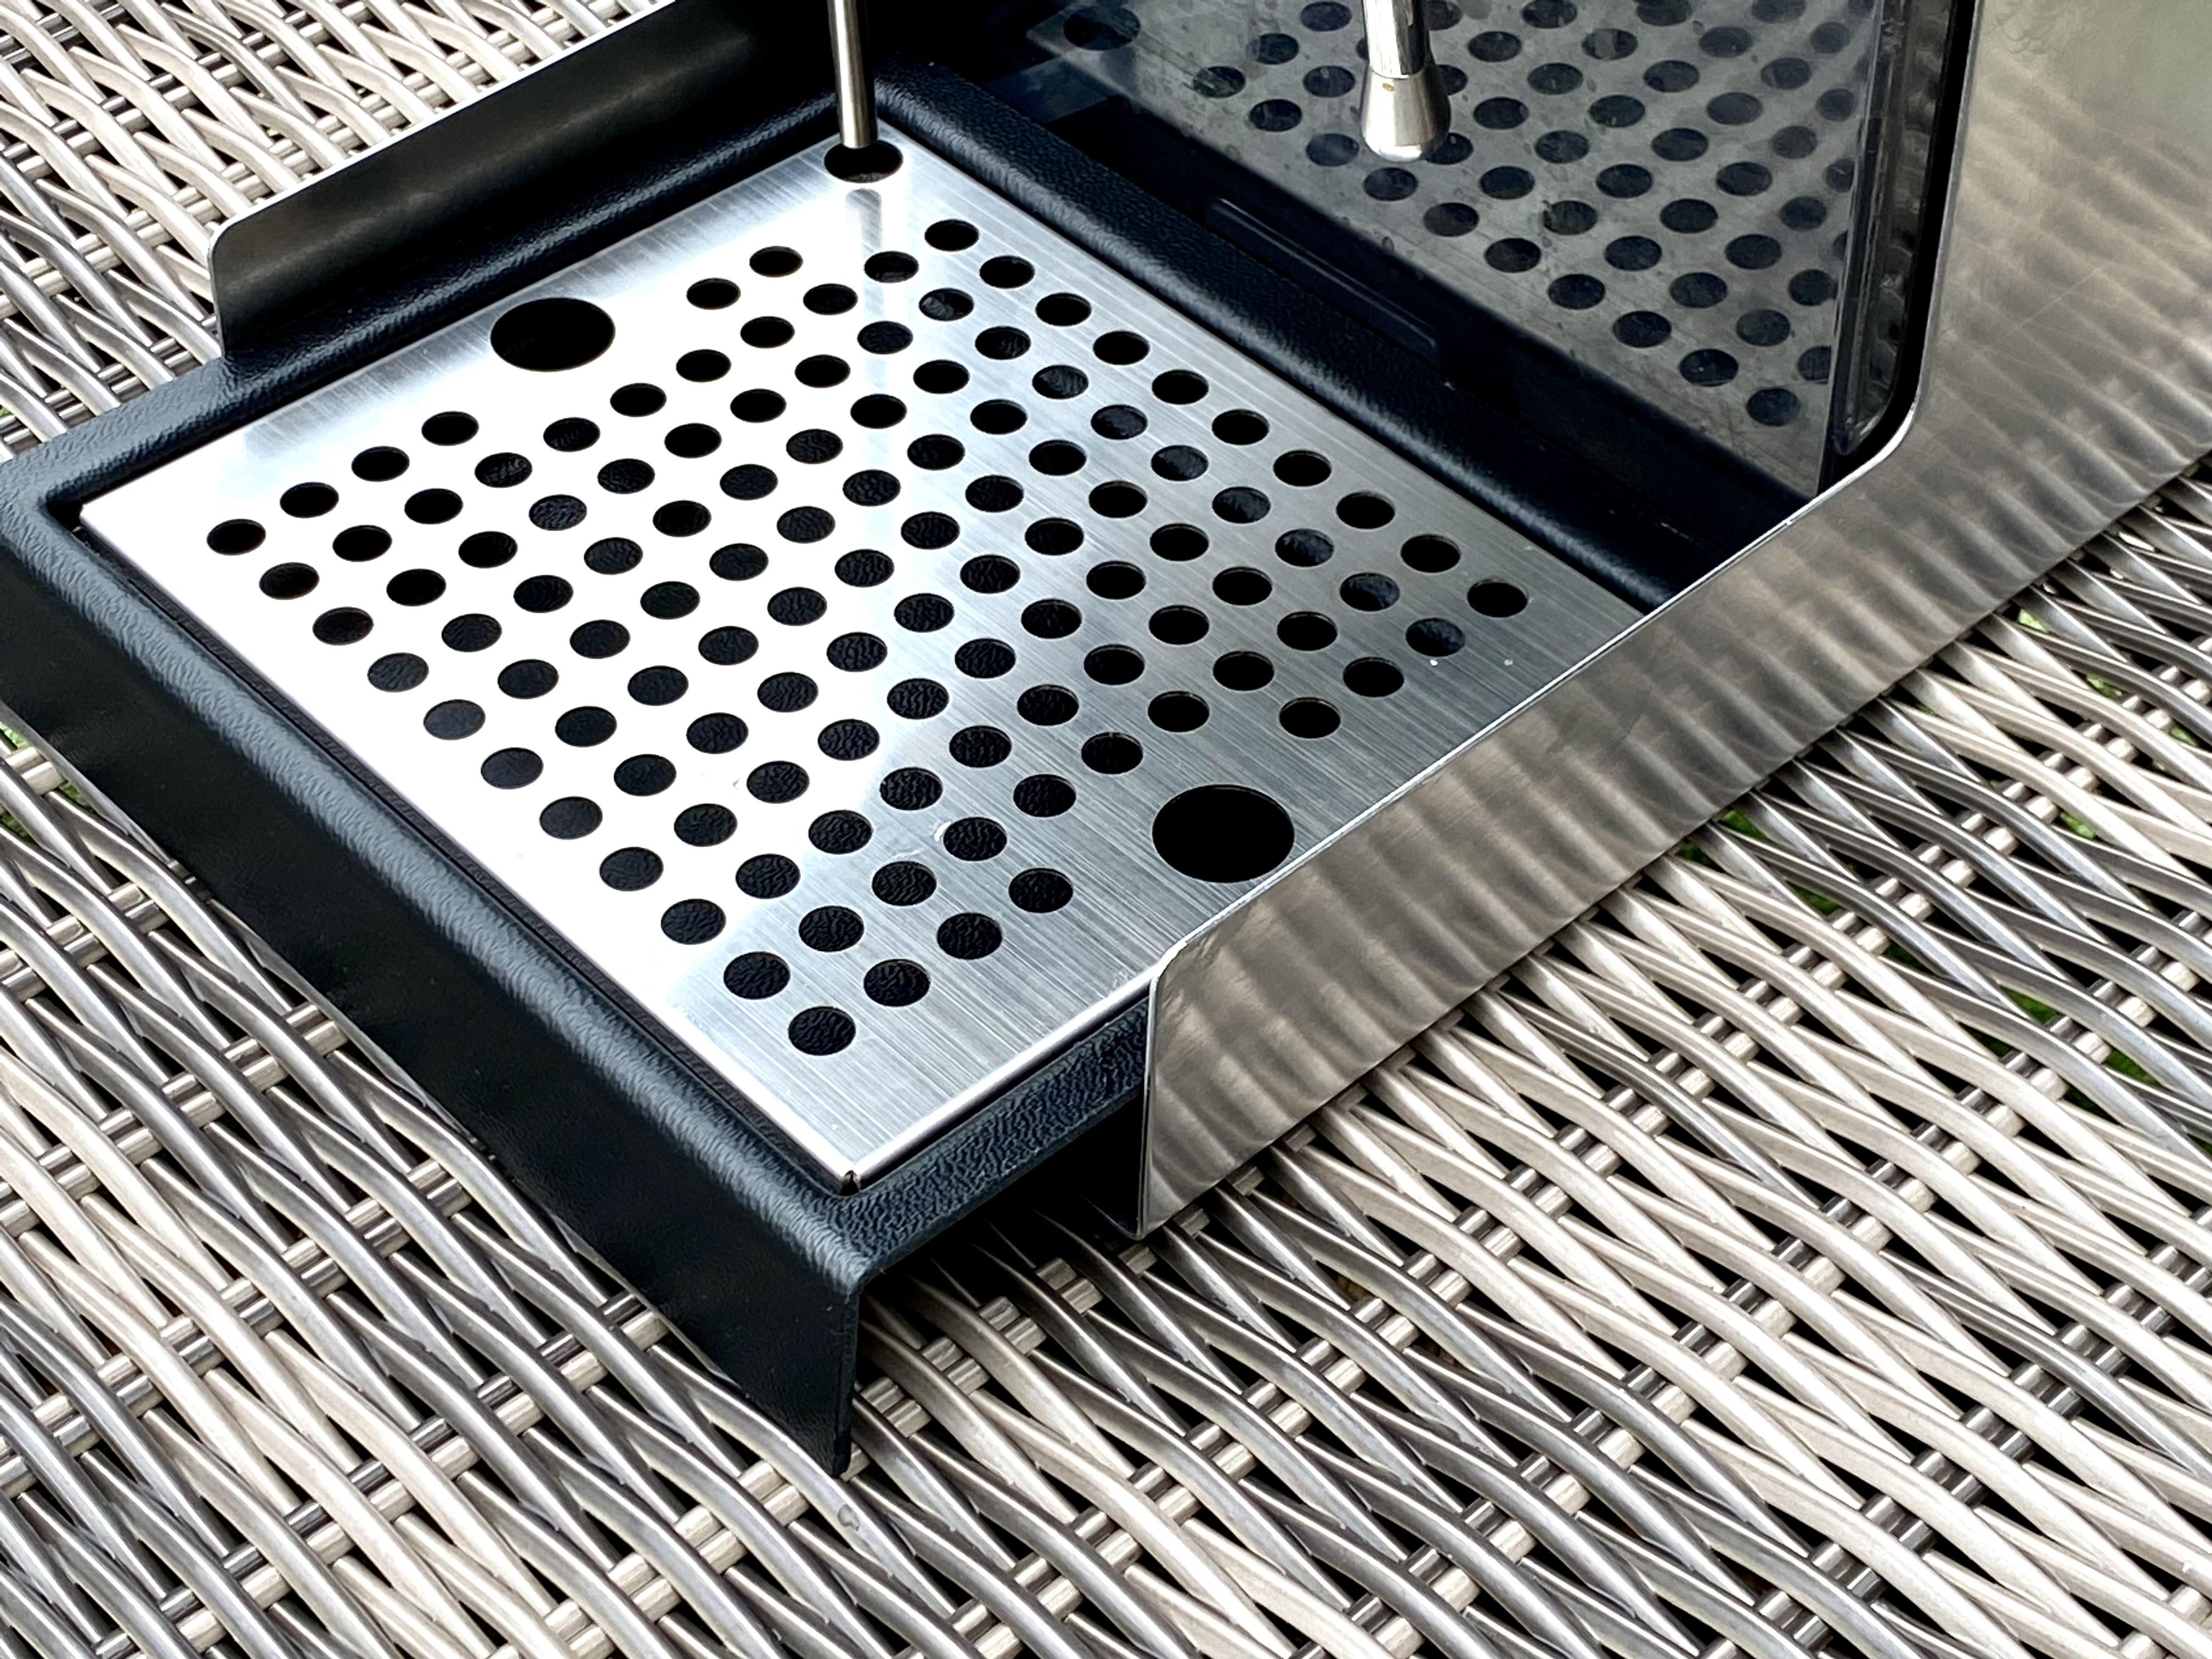 Extended MAX Drip tray with grate and tube installed side